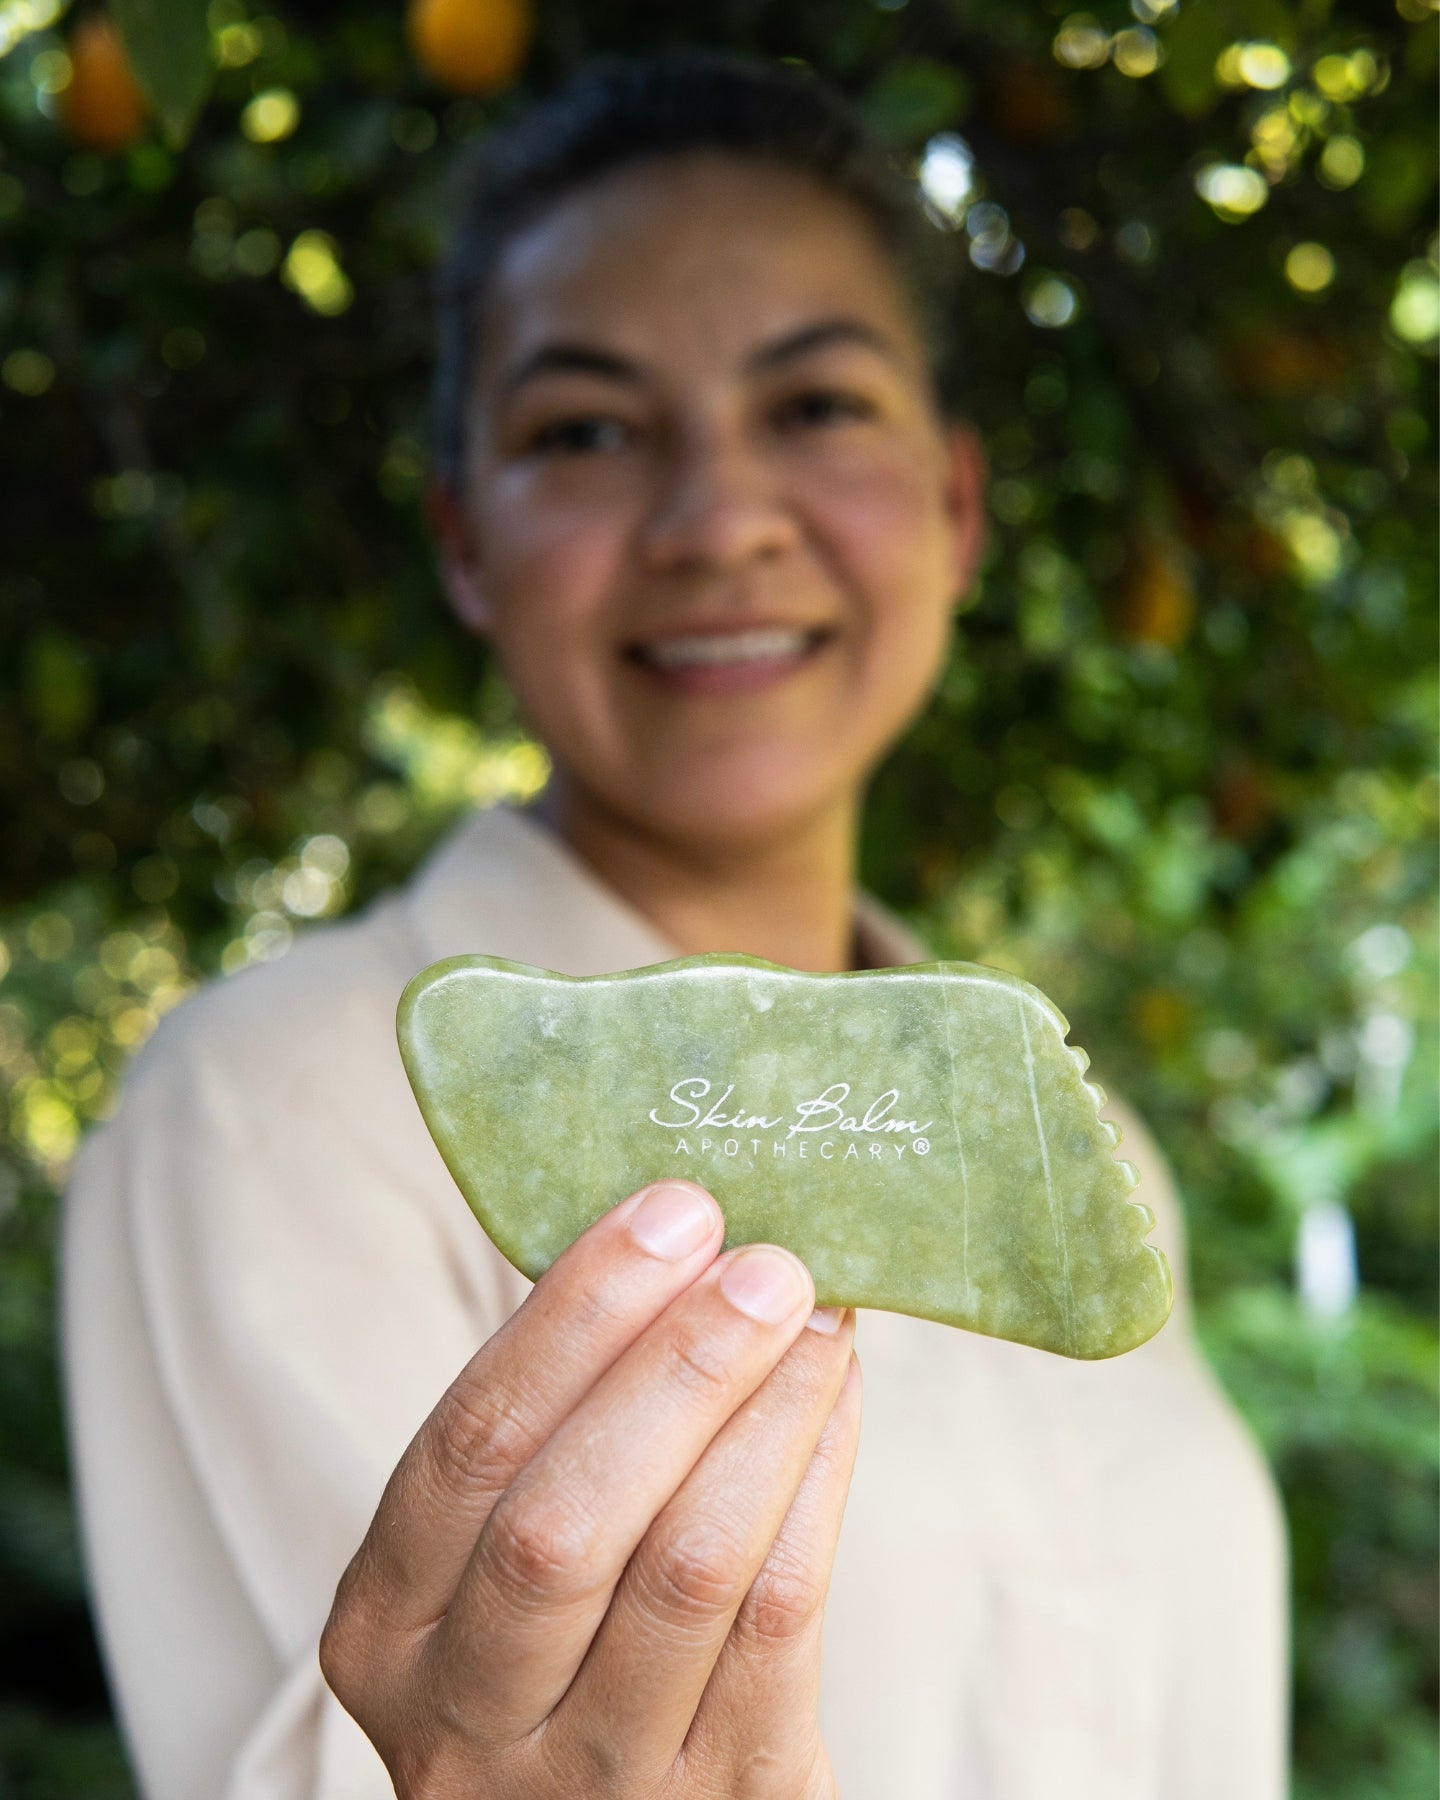 A close-up shot of the Jade Facial Stone with a smiling woman blurred in the background.